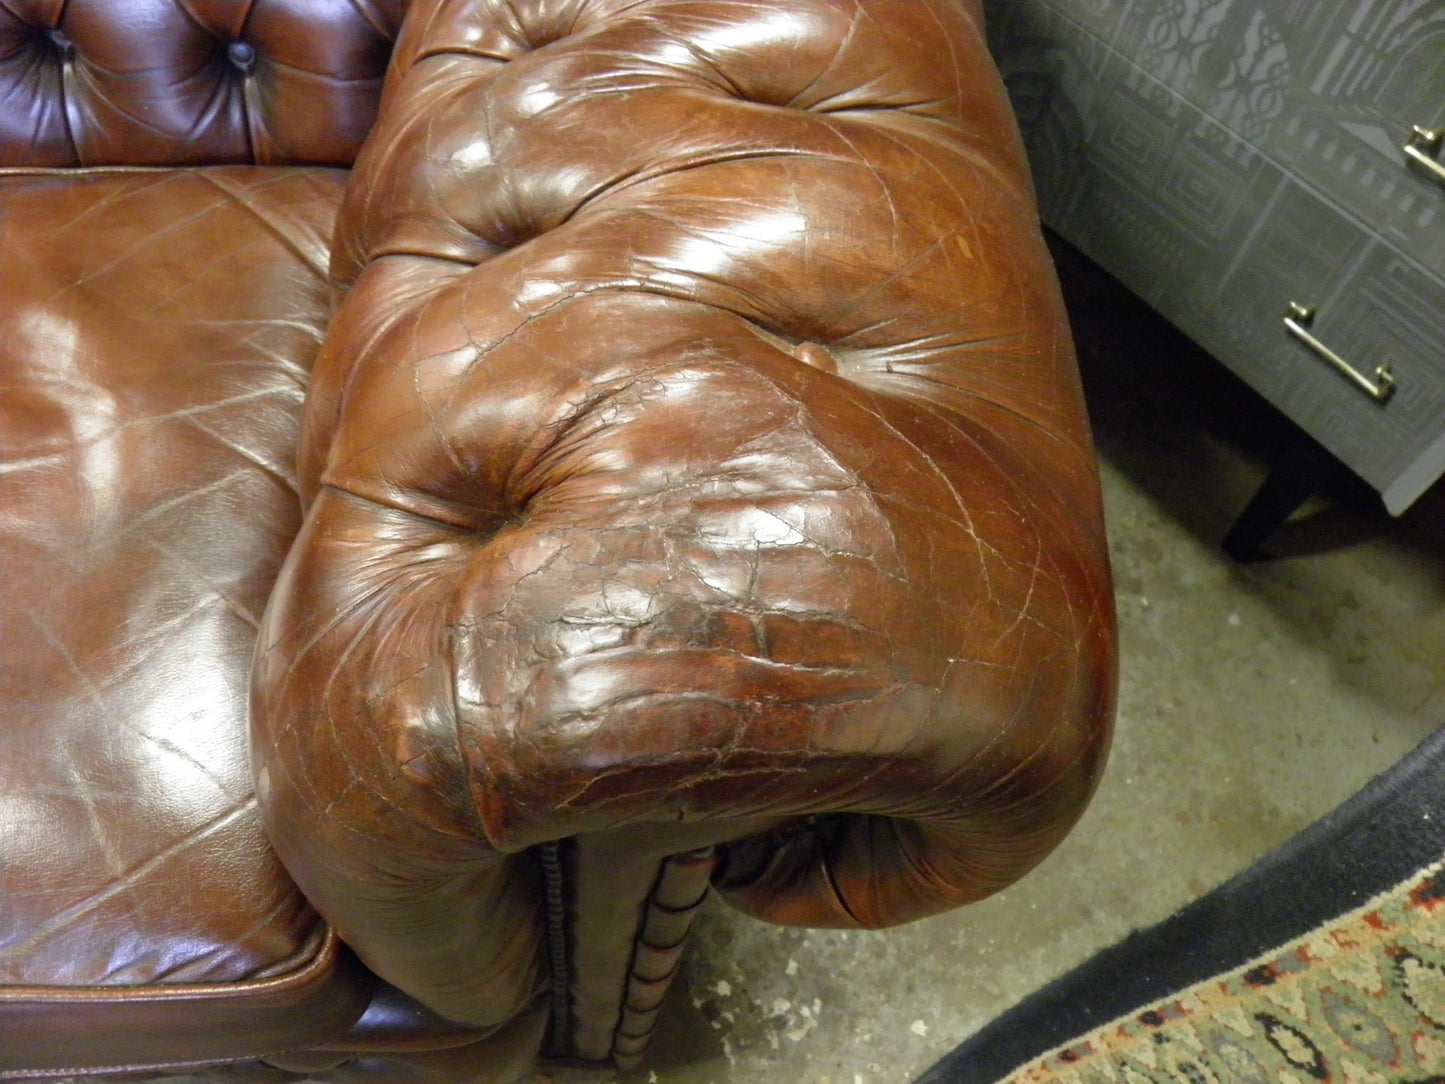 Vintage Brown Leather Chesterfield 3 Seat Sofa